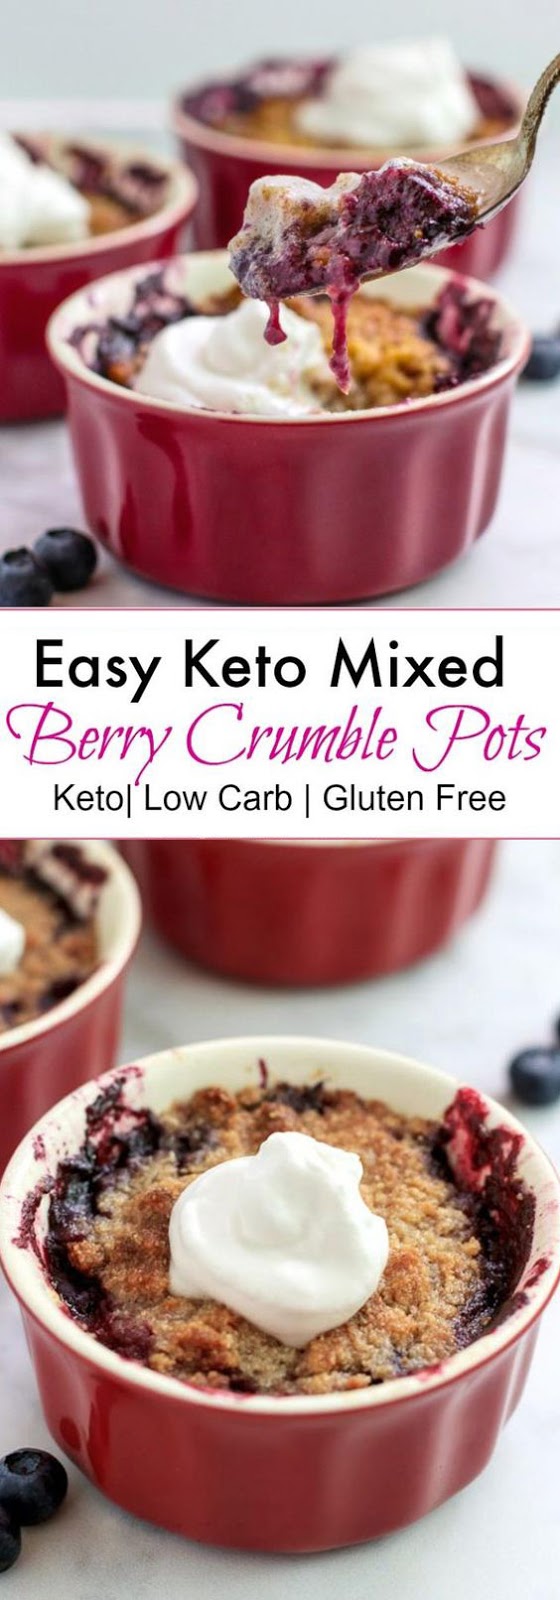 Easy Keto Mixed Berry Crumble Pots (Keto + Low Carb + Gluten Free)